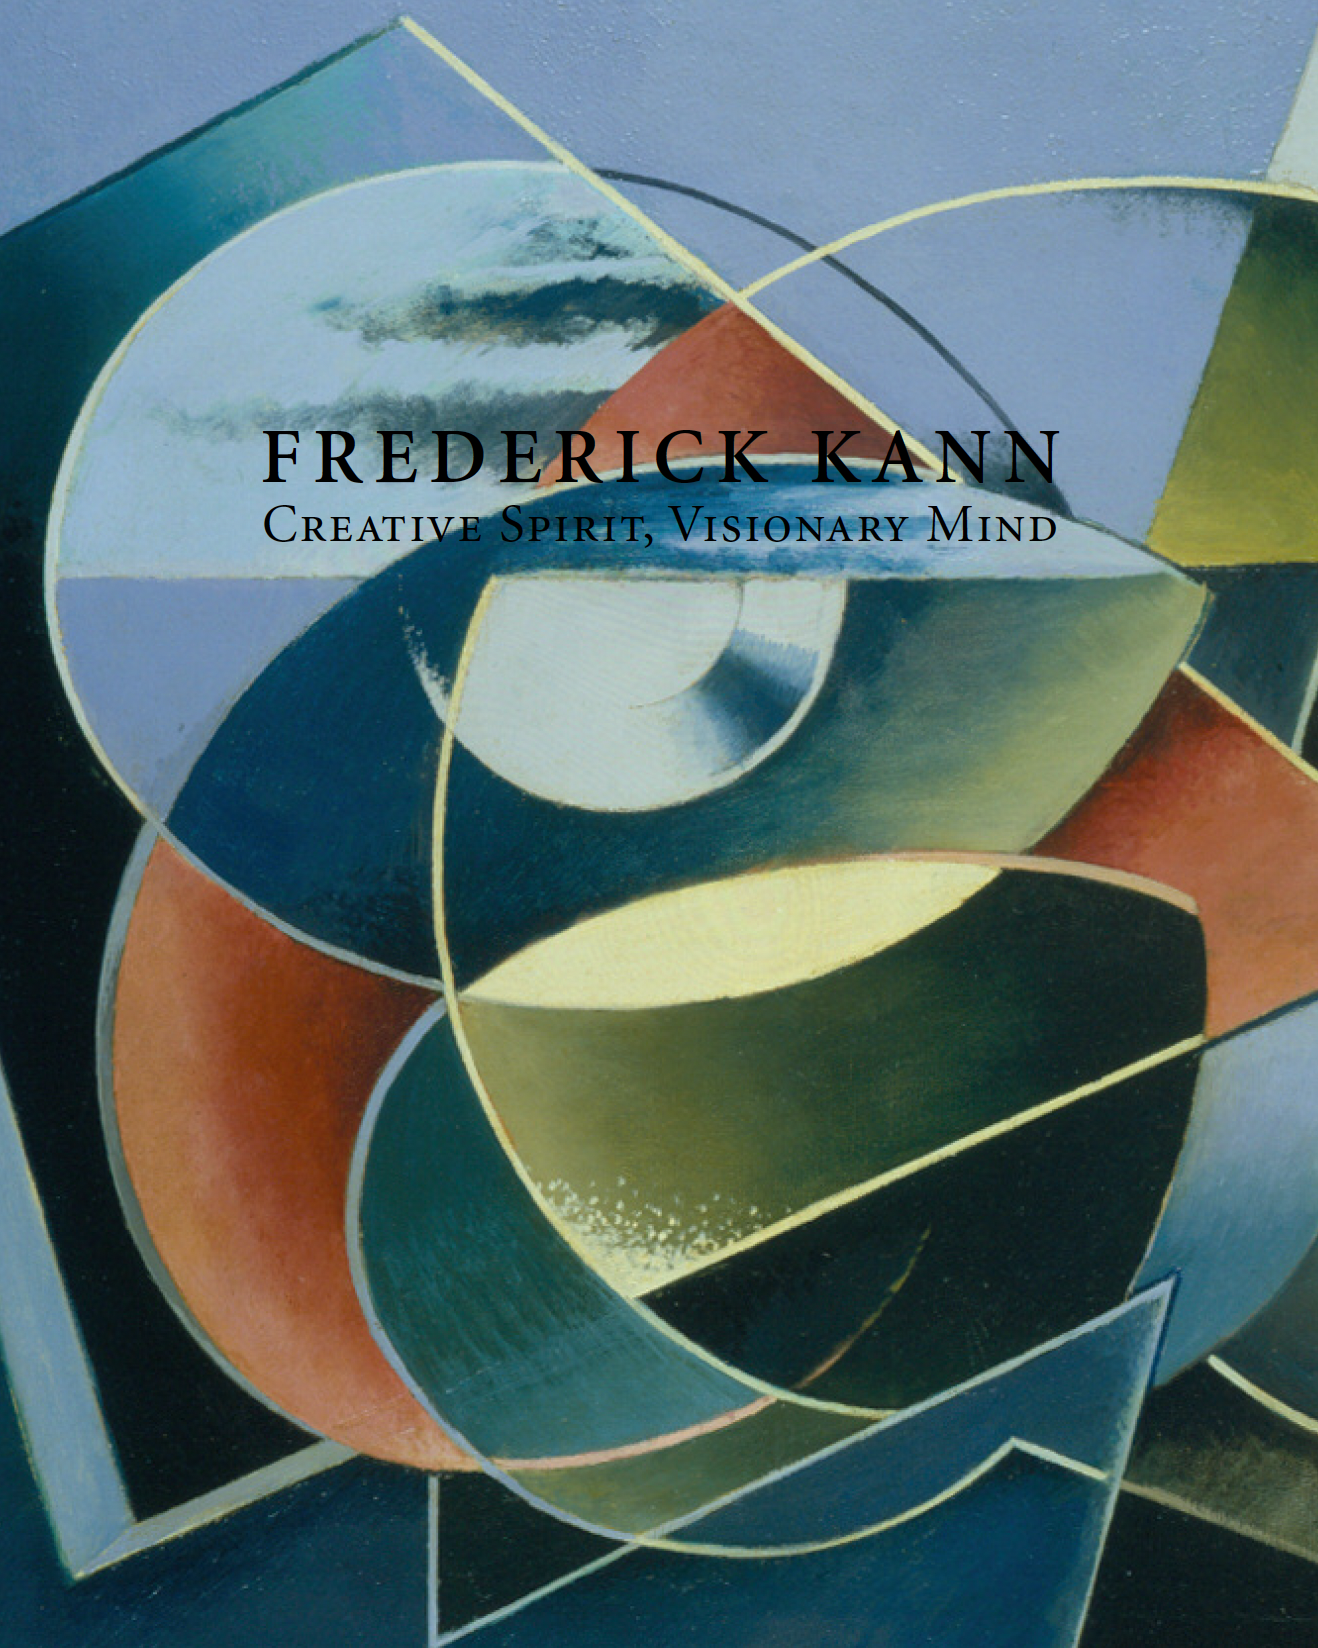 Frederick Kann: # Creative Spirit, Visionary Mind # 2007 &lt;alt="Catalogue cover with title over geometric abstract painting in blues, greens, red, and yellow."&gt; 